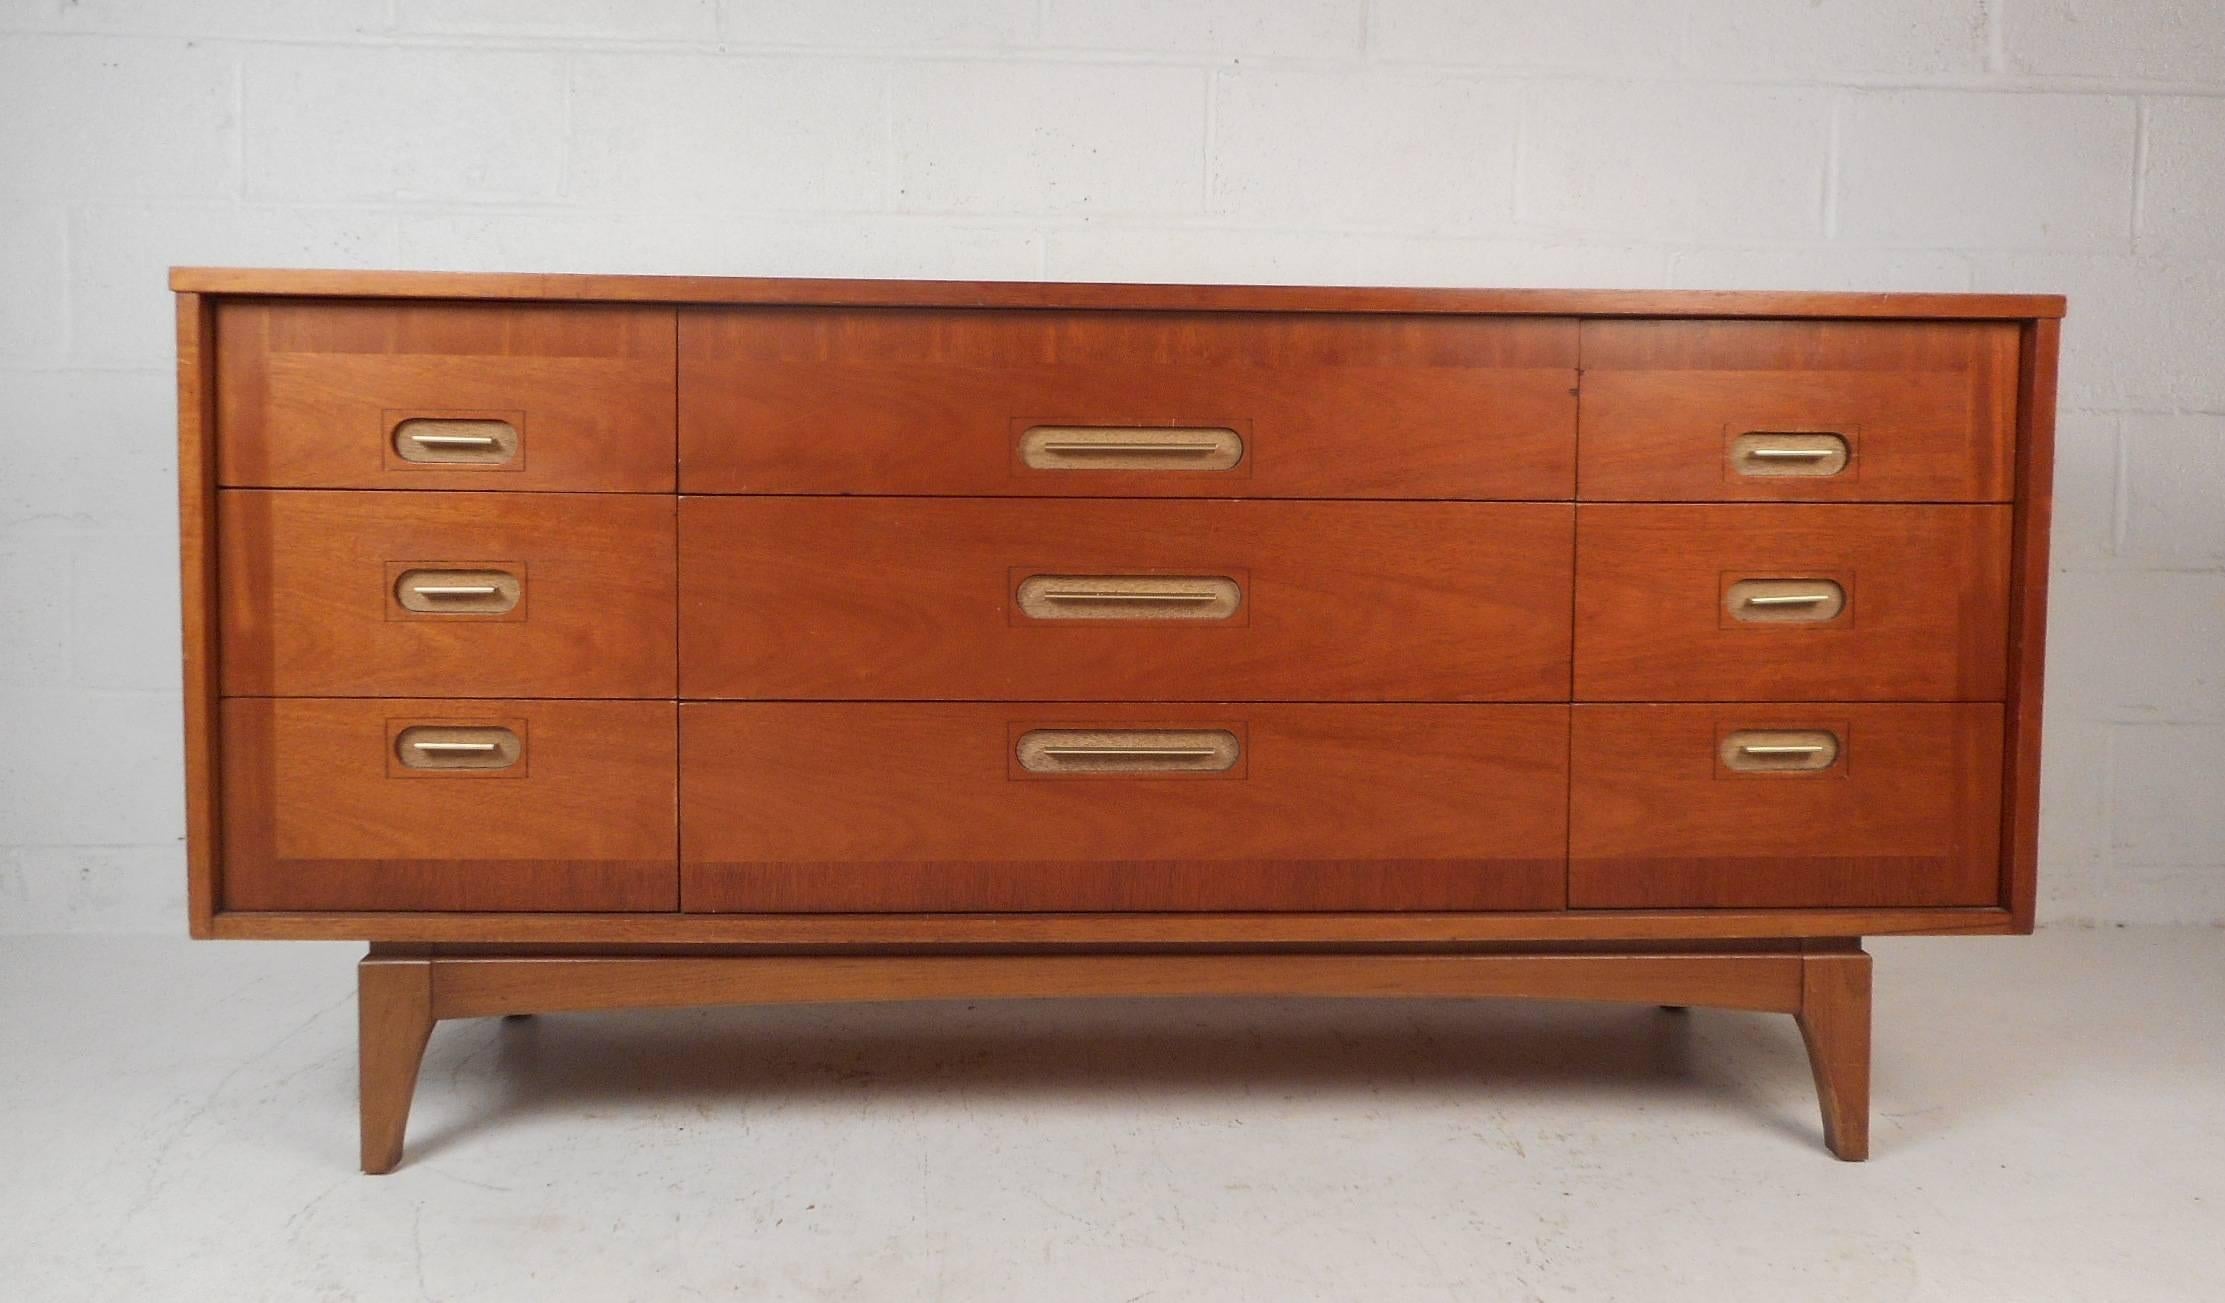 This beautiful Mid-Century Modern dresser features unique oval recessed pulls on each of its nine drawers. The drawer fronts have wood grain running in a different direction around the perimeter adding a unique quality to this piece. Quality